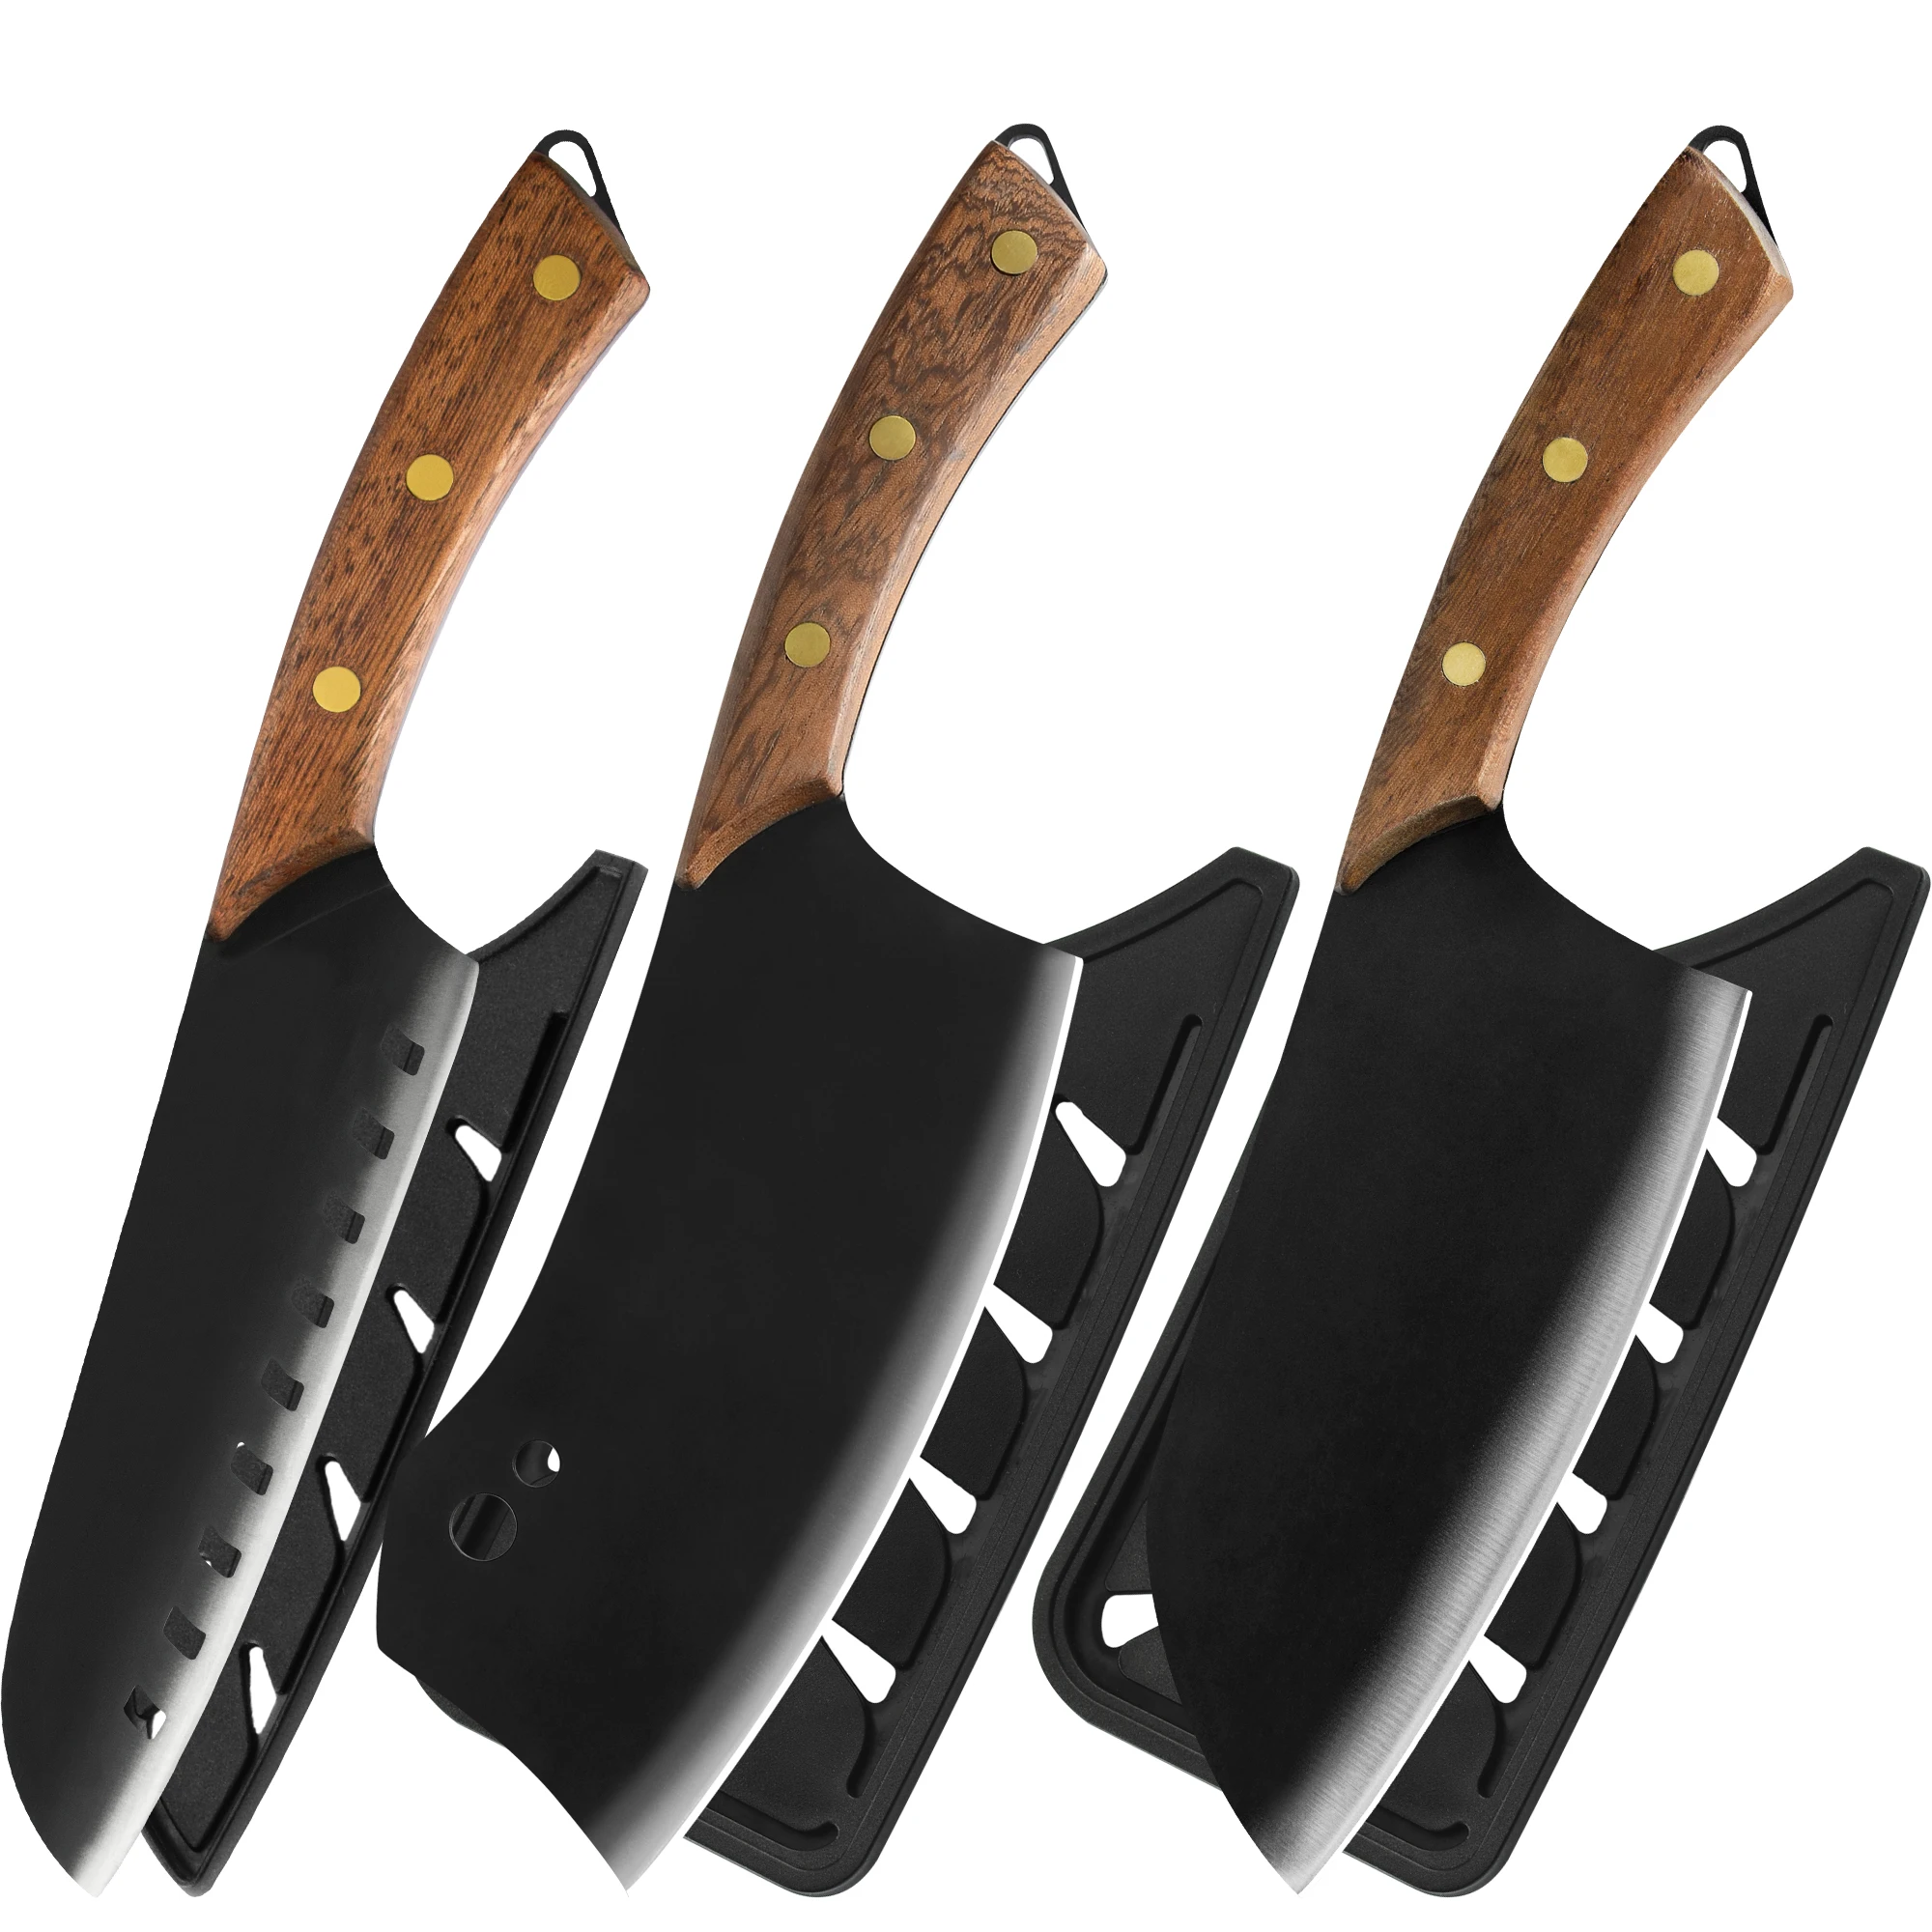 

XYj 3 Pieces Knives Set Full Tang Kitchen Cutlery Stainless Steel Meat Cleaver Chopping Knives Chef Knives For Outdoor Camping